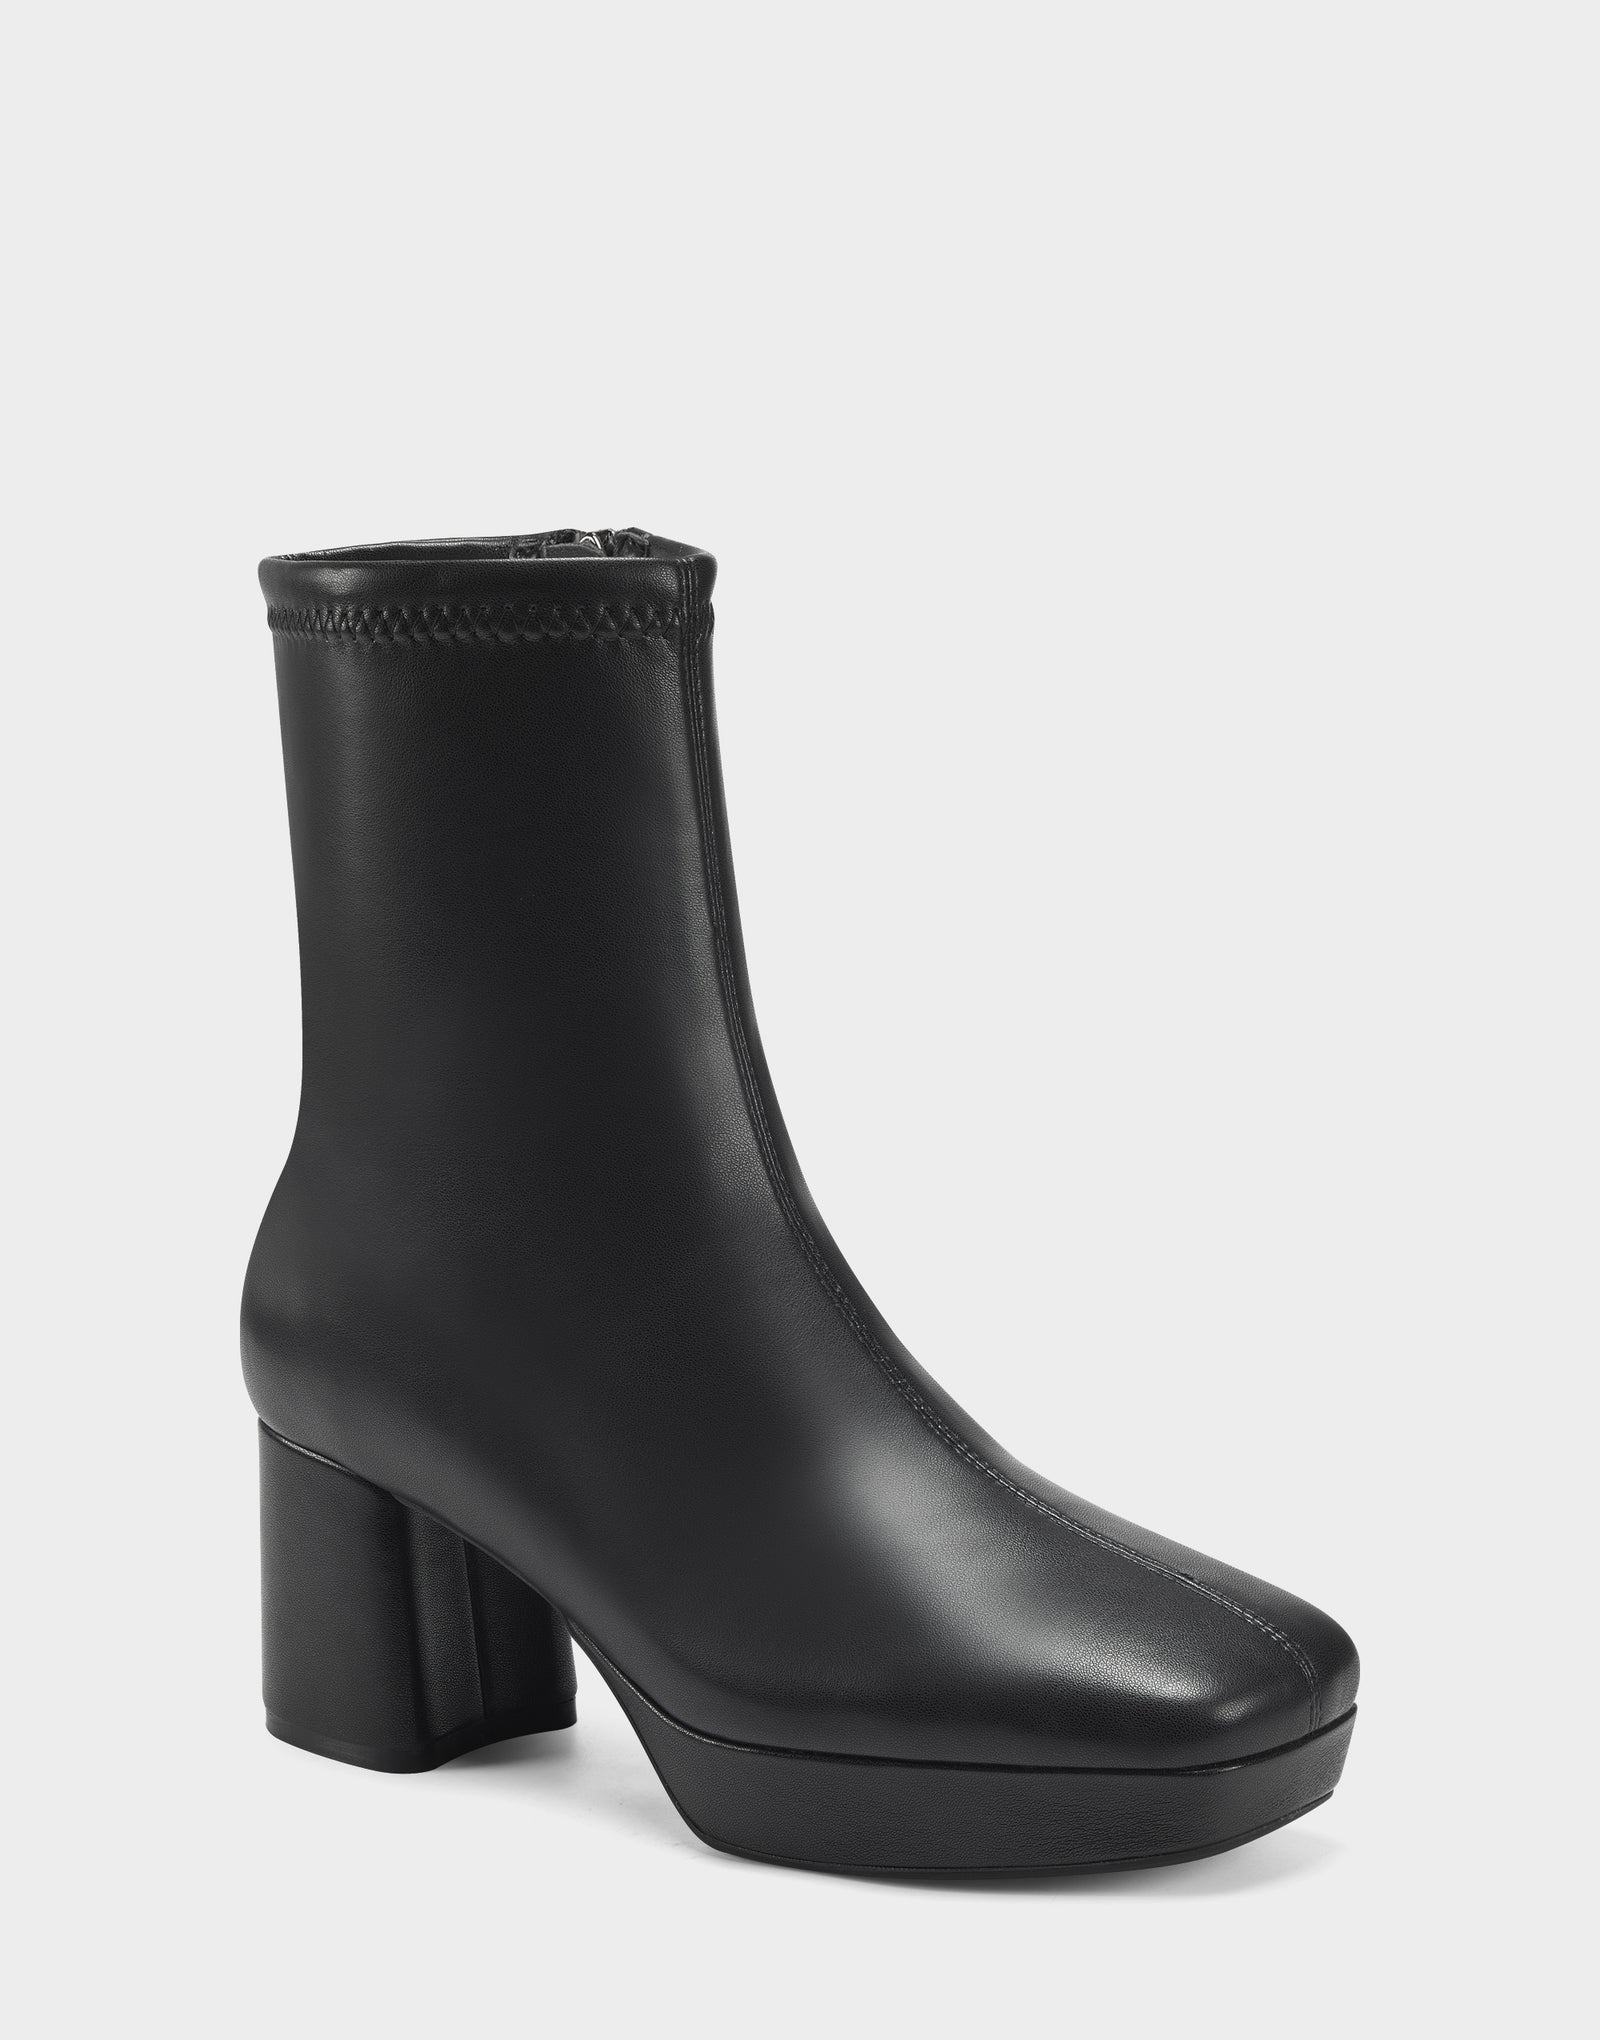 Womens' Ankle Boots & Chelsea Boots for Women | PEDRO SG